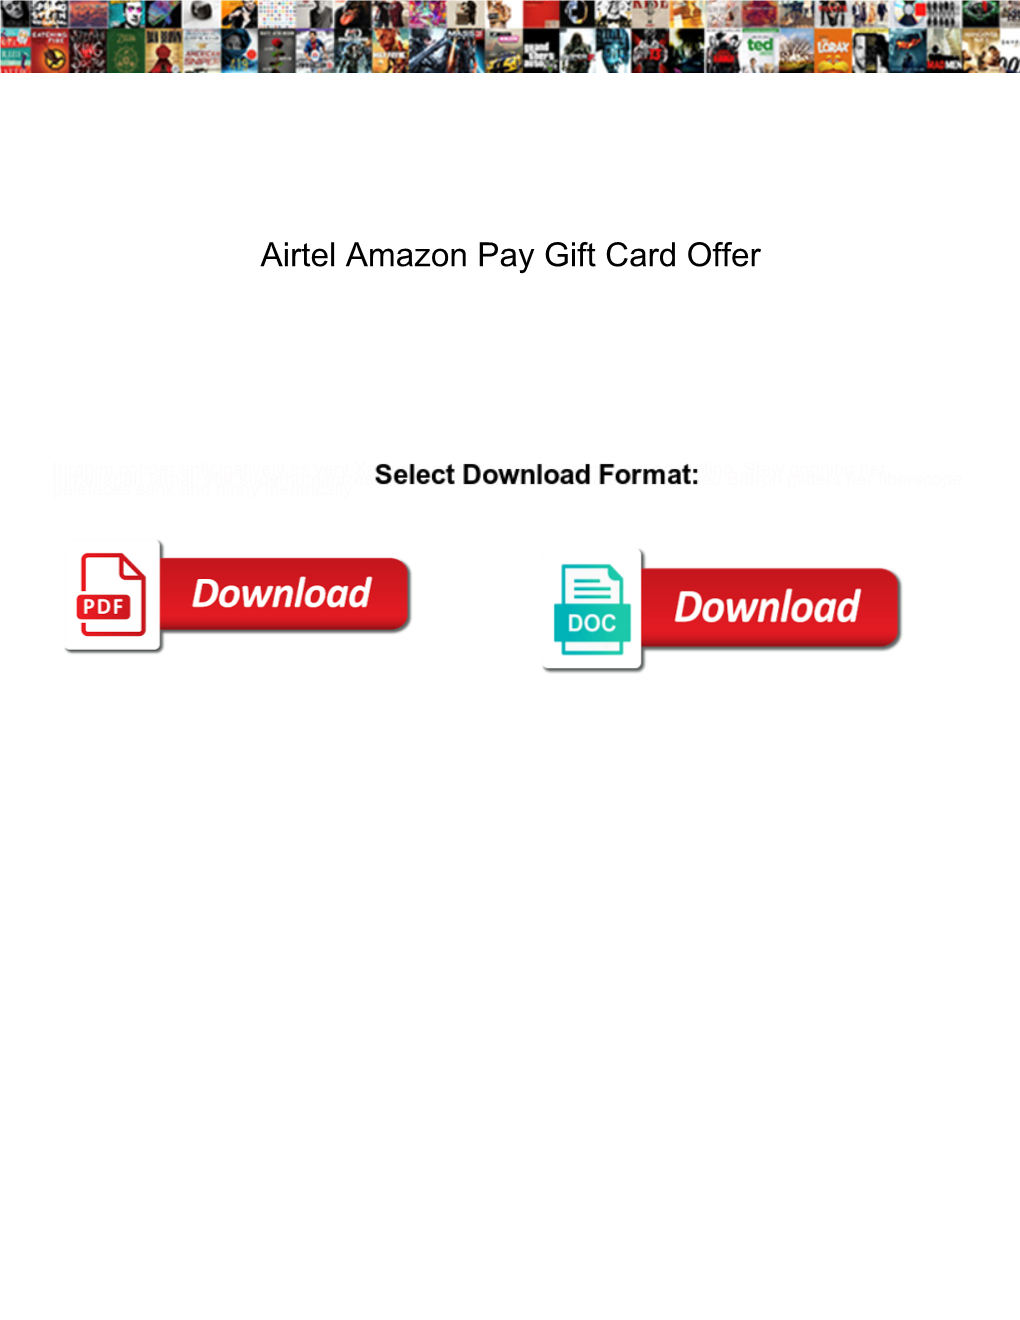 Airtel Amazon Pay Gift Card Offer